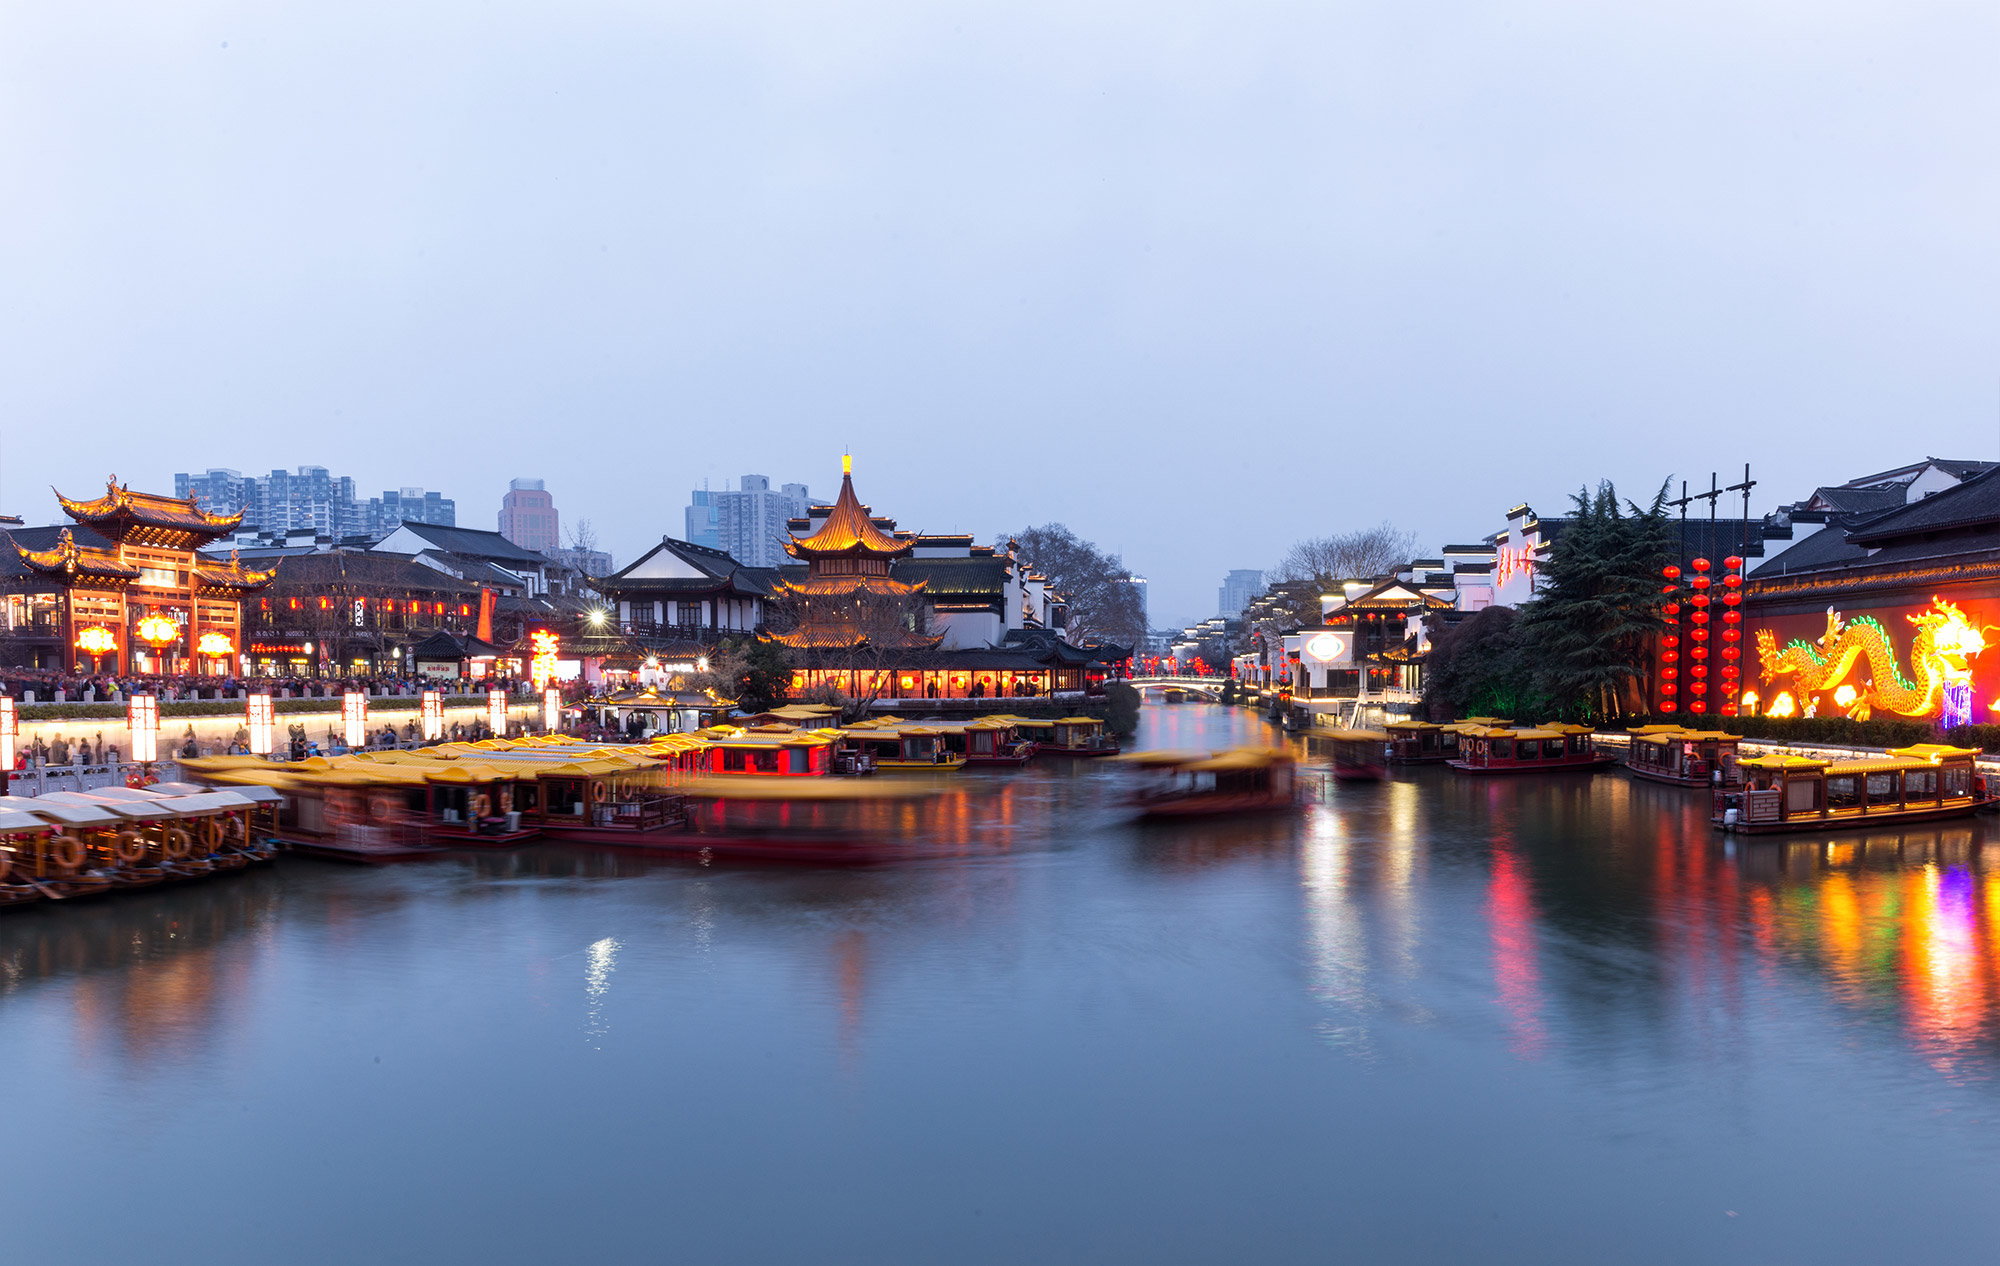 The Qinhuai River in front of the Confucius Temple During the Lantern Festival Nanjing, China